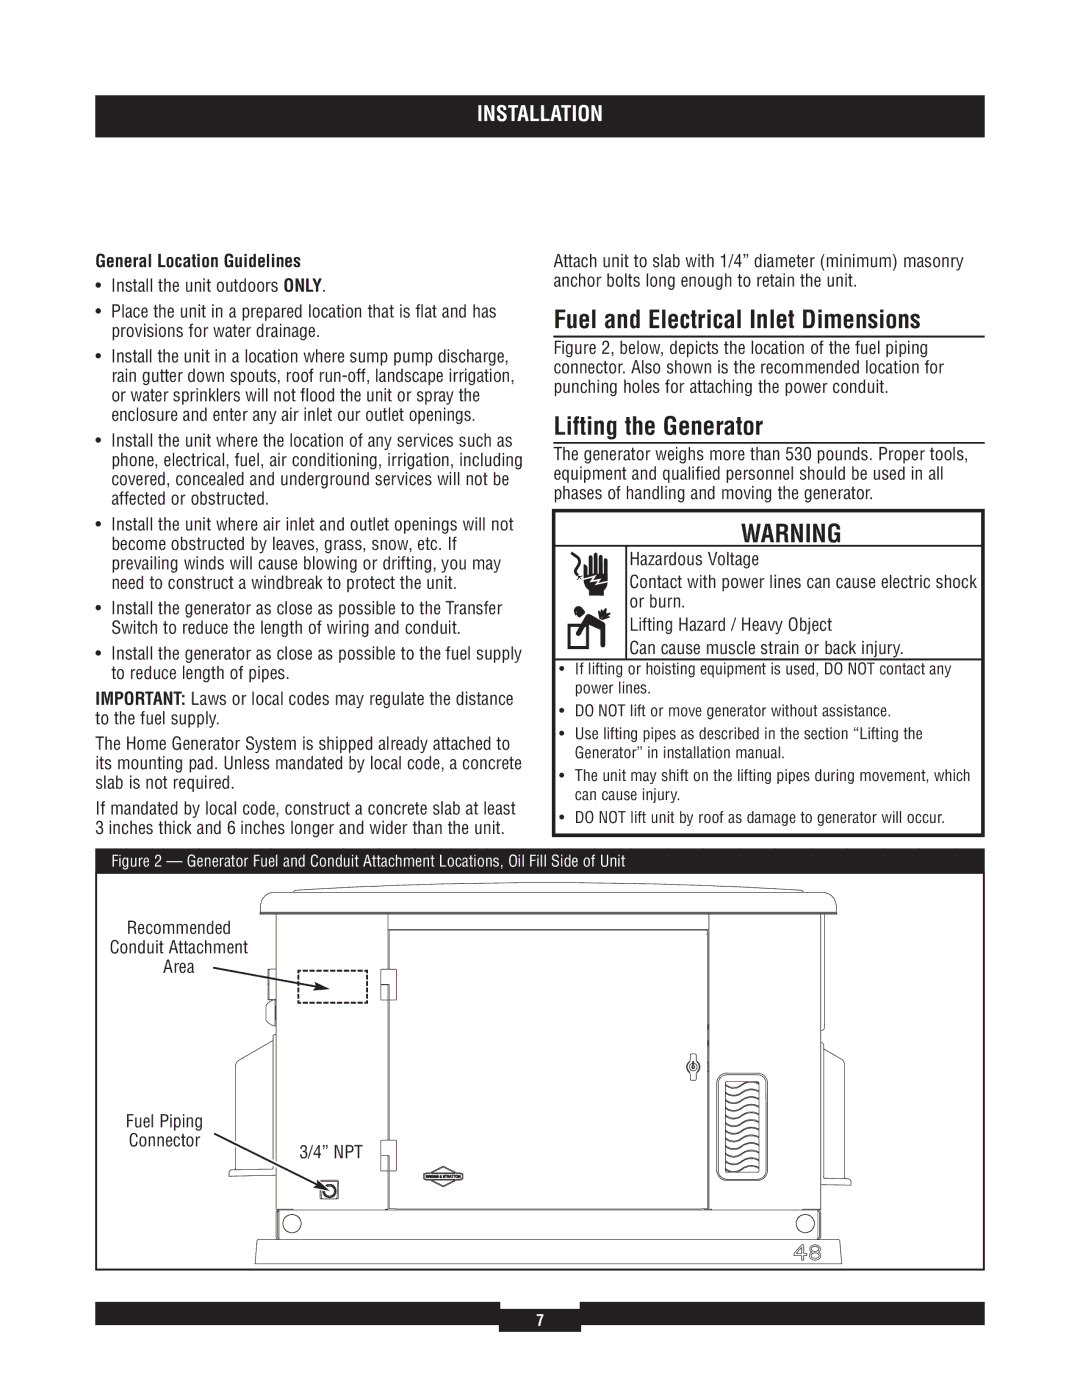 Briggs & Stratton 40210 Fuel and Electrical Inlet Dimensions, Lifting the Generator, General Location Guidelines, Npt 